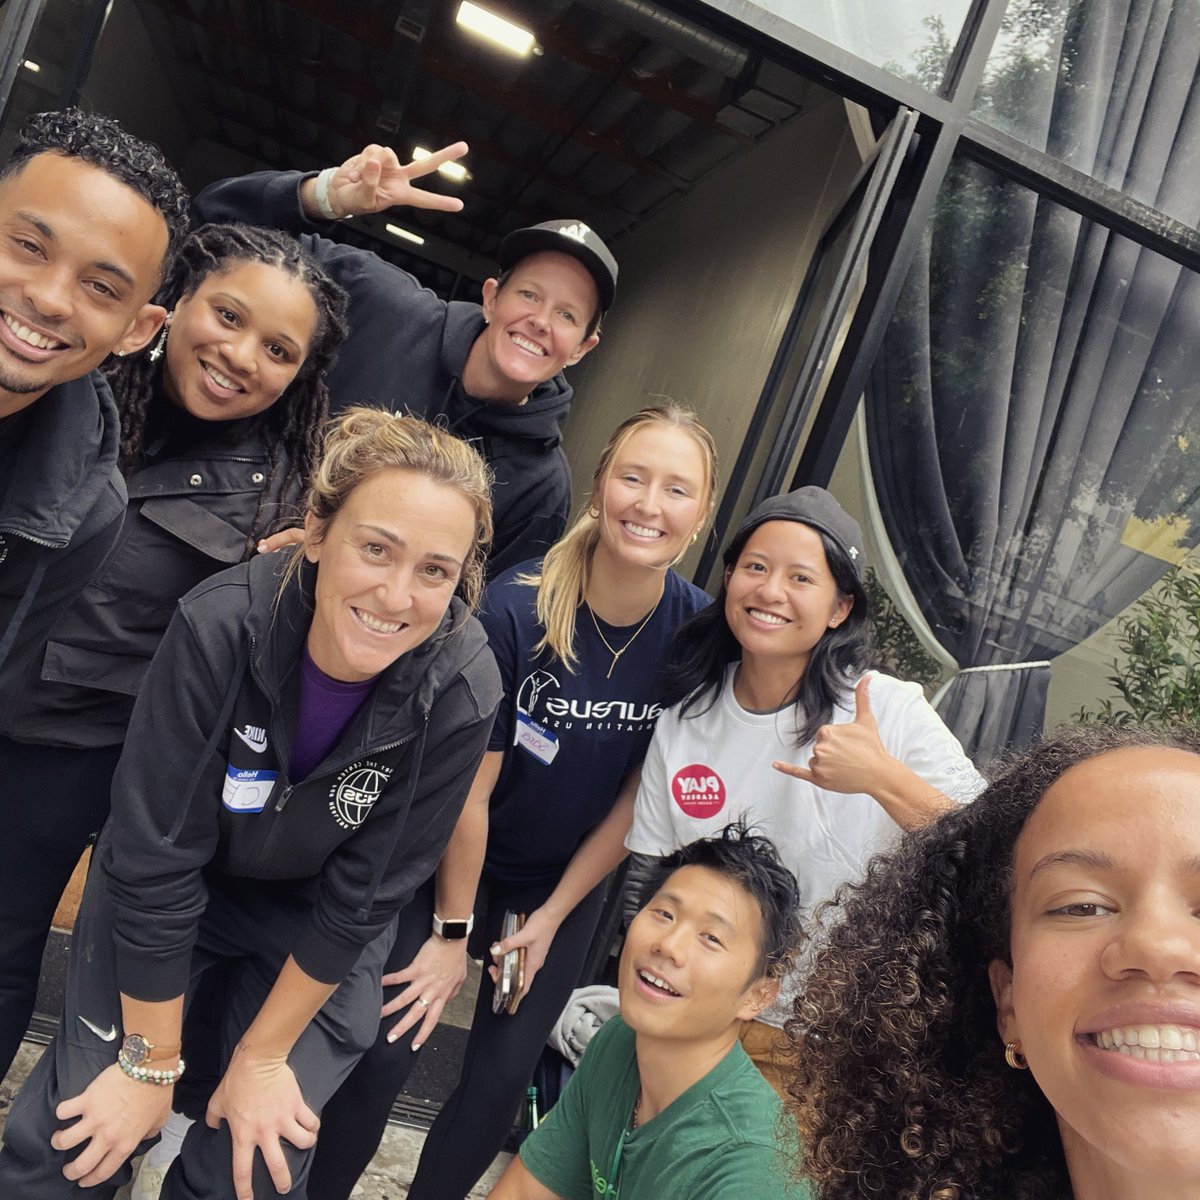 Thanks @PlayAcadNaomi & @Laureus_USA for having us chat How to Coach Girls with your AMAZING partners and programs. A perfect way to celebrate #internationaldayofthegirl. Let’s hang out again, soon? Research says #lovewins soo… ❤️☺️